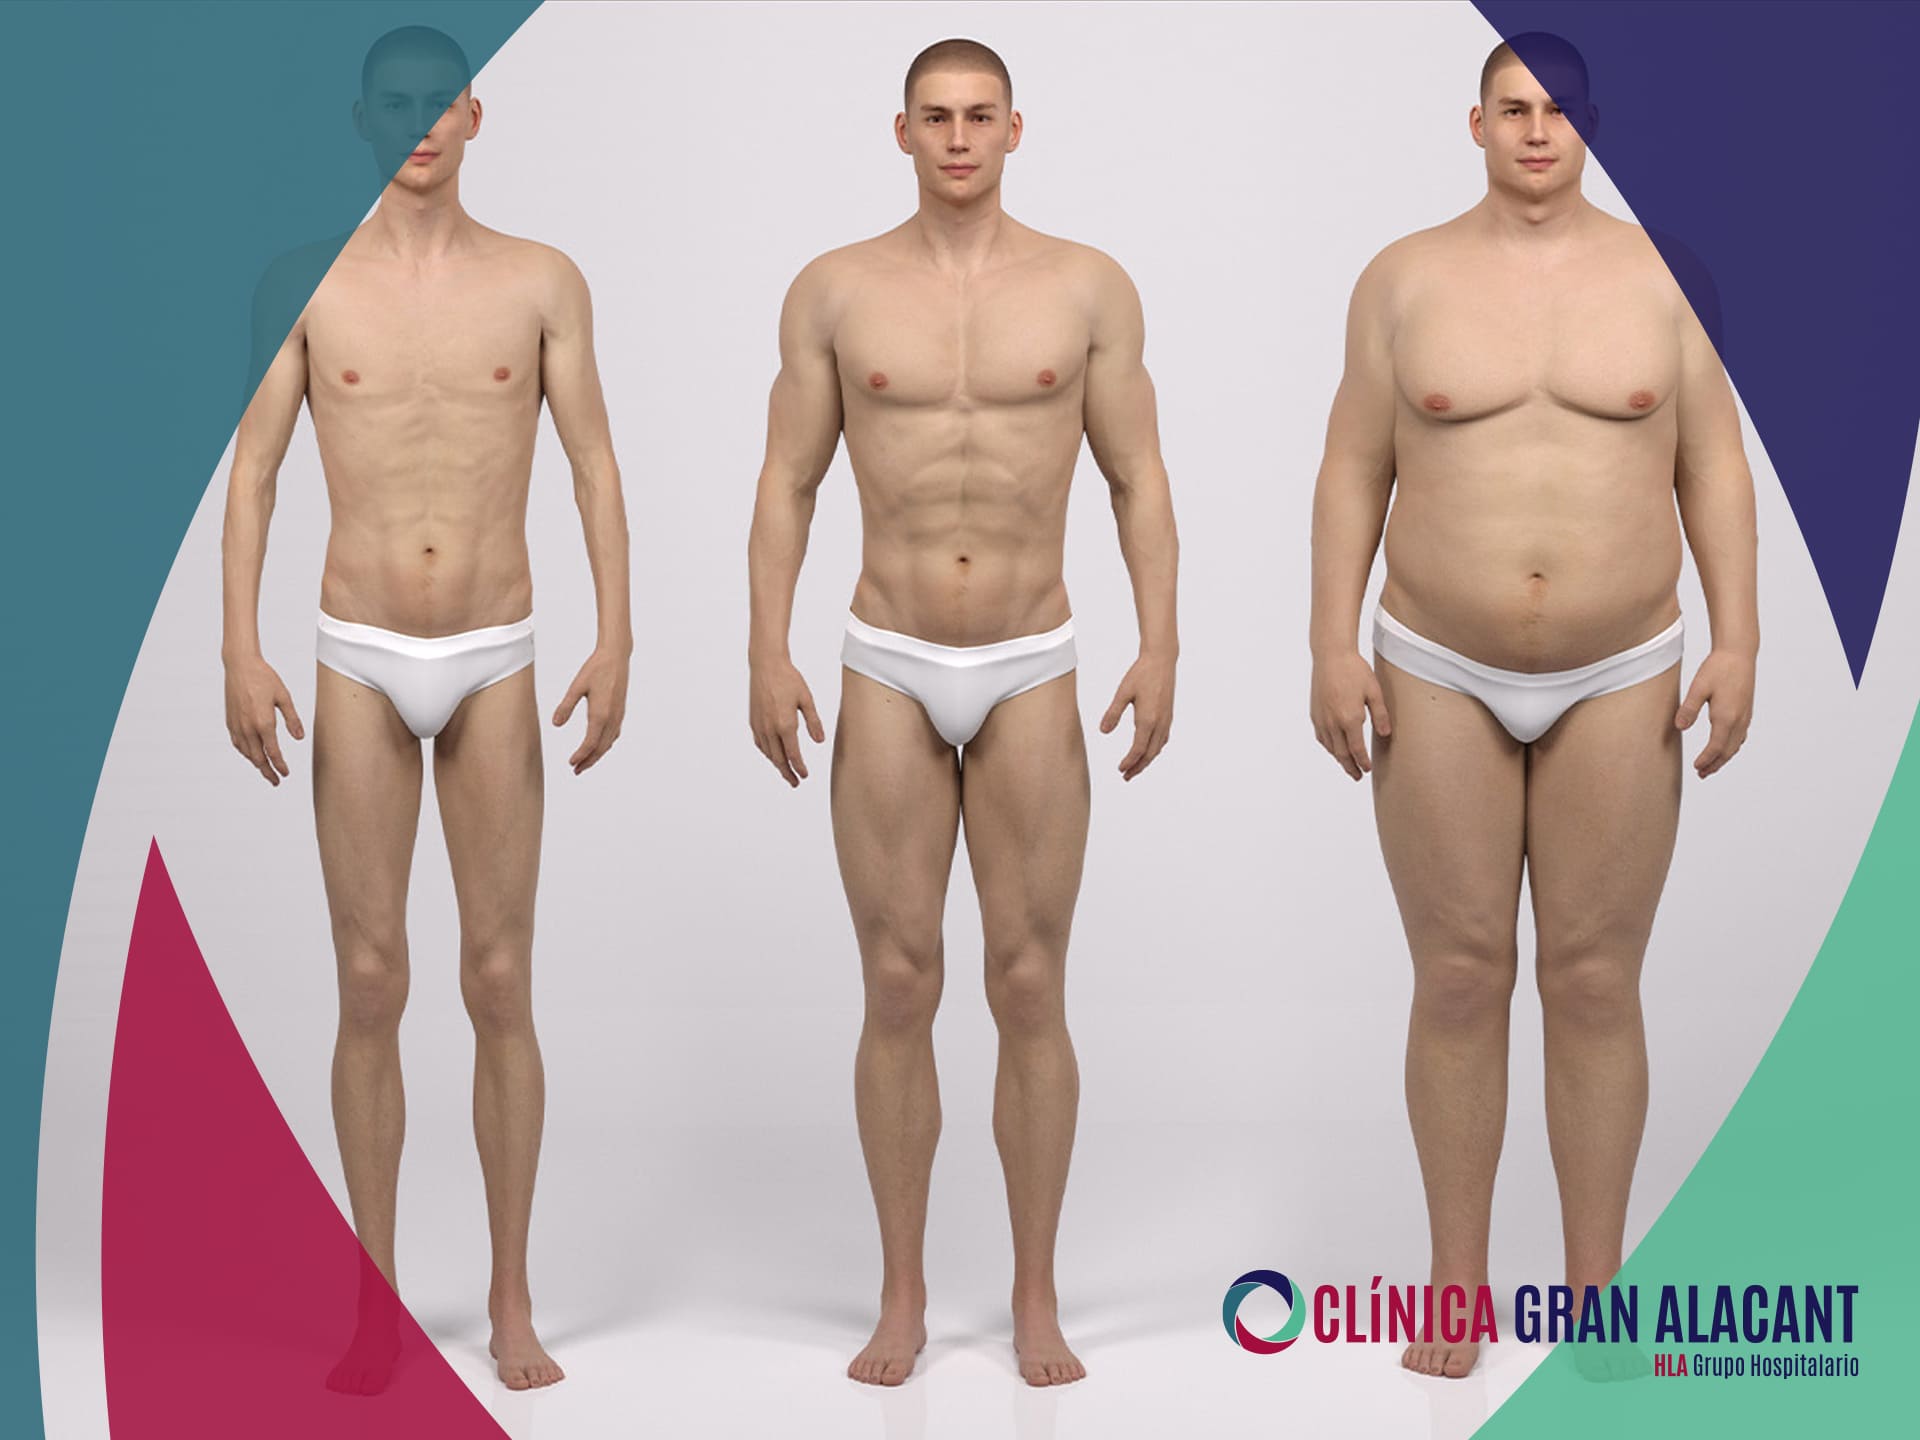 What is the healthiest body type for men? What are the benefits of